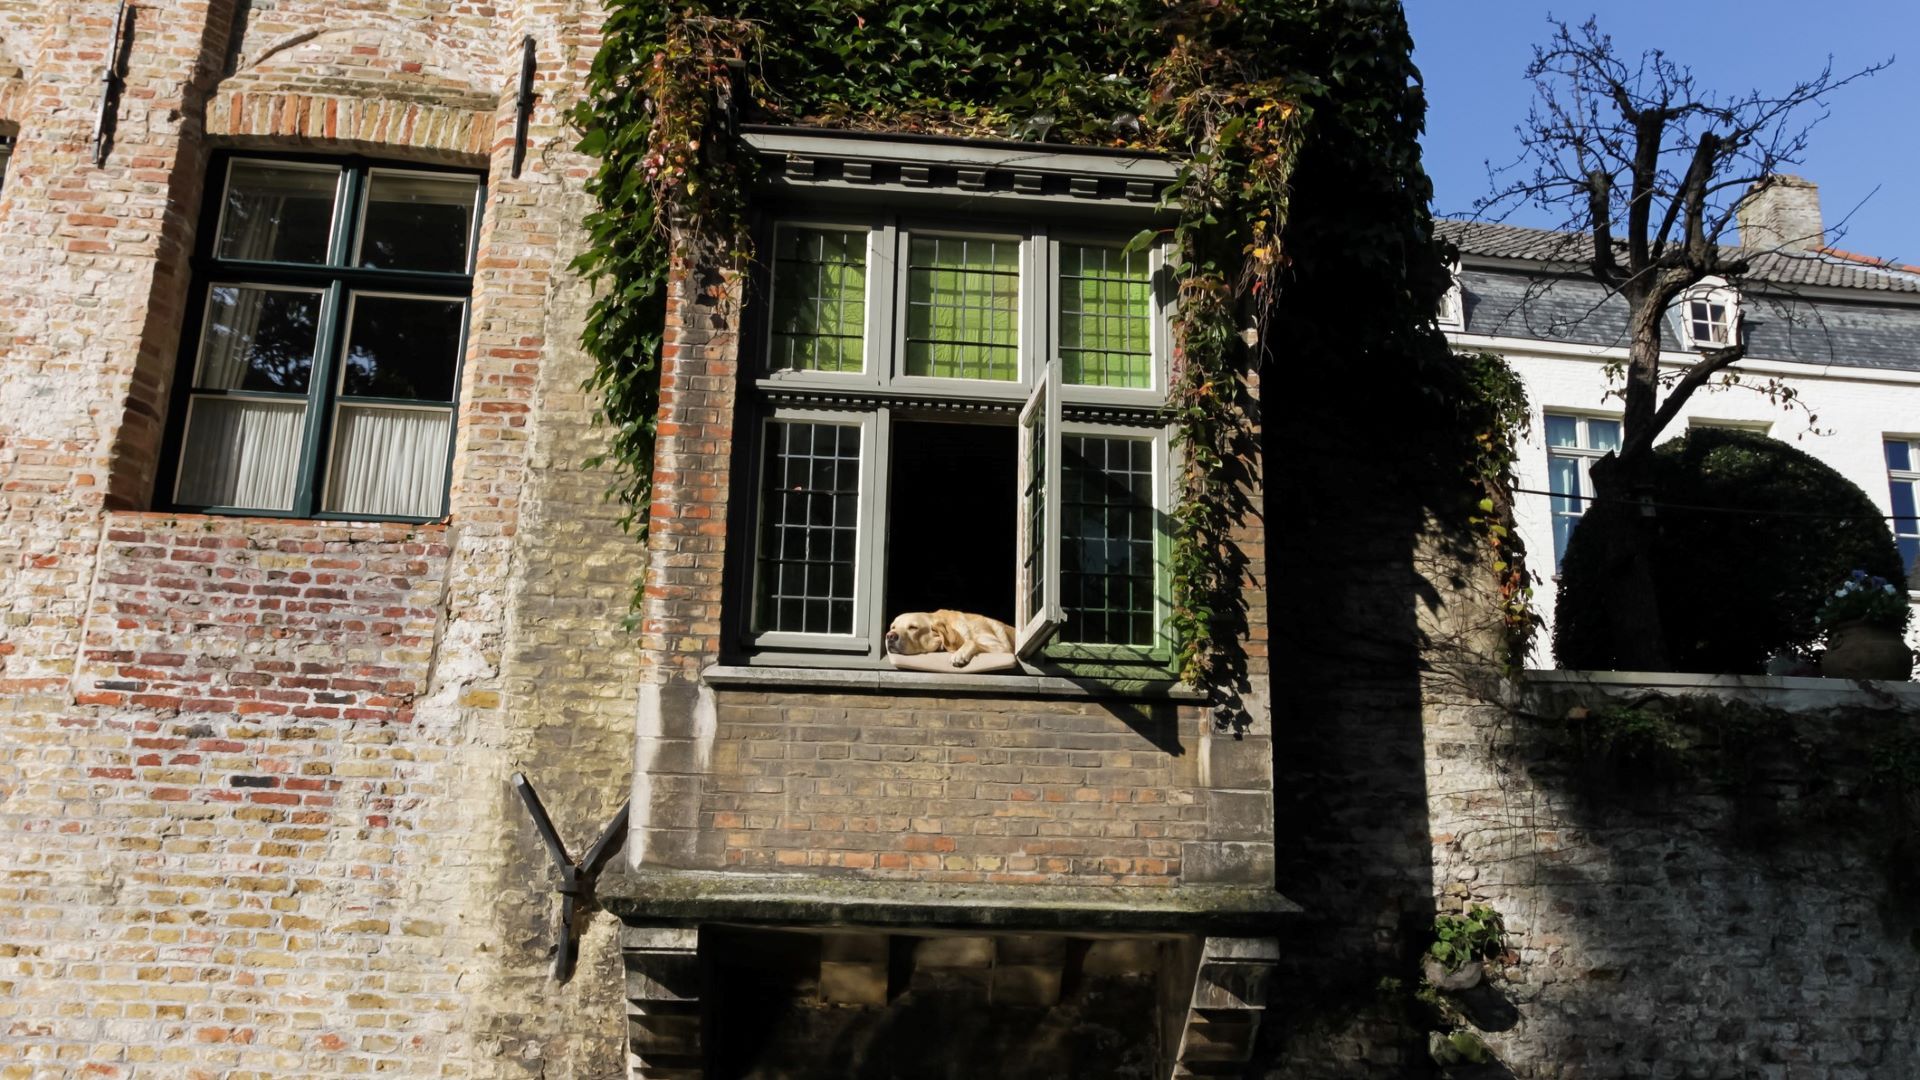 <p>                     You might remember the window-dwelling Labrador retriever, Fidèle, known for snoozing above the canal between 2003 and 2016, even making an appearance in the film <em>In Bruges.</em> While he has sadly died, you can visit the spot he used to sunbathe with your own four-legged friend, as Bruges is a very pet friendly city.                     </p>